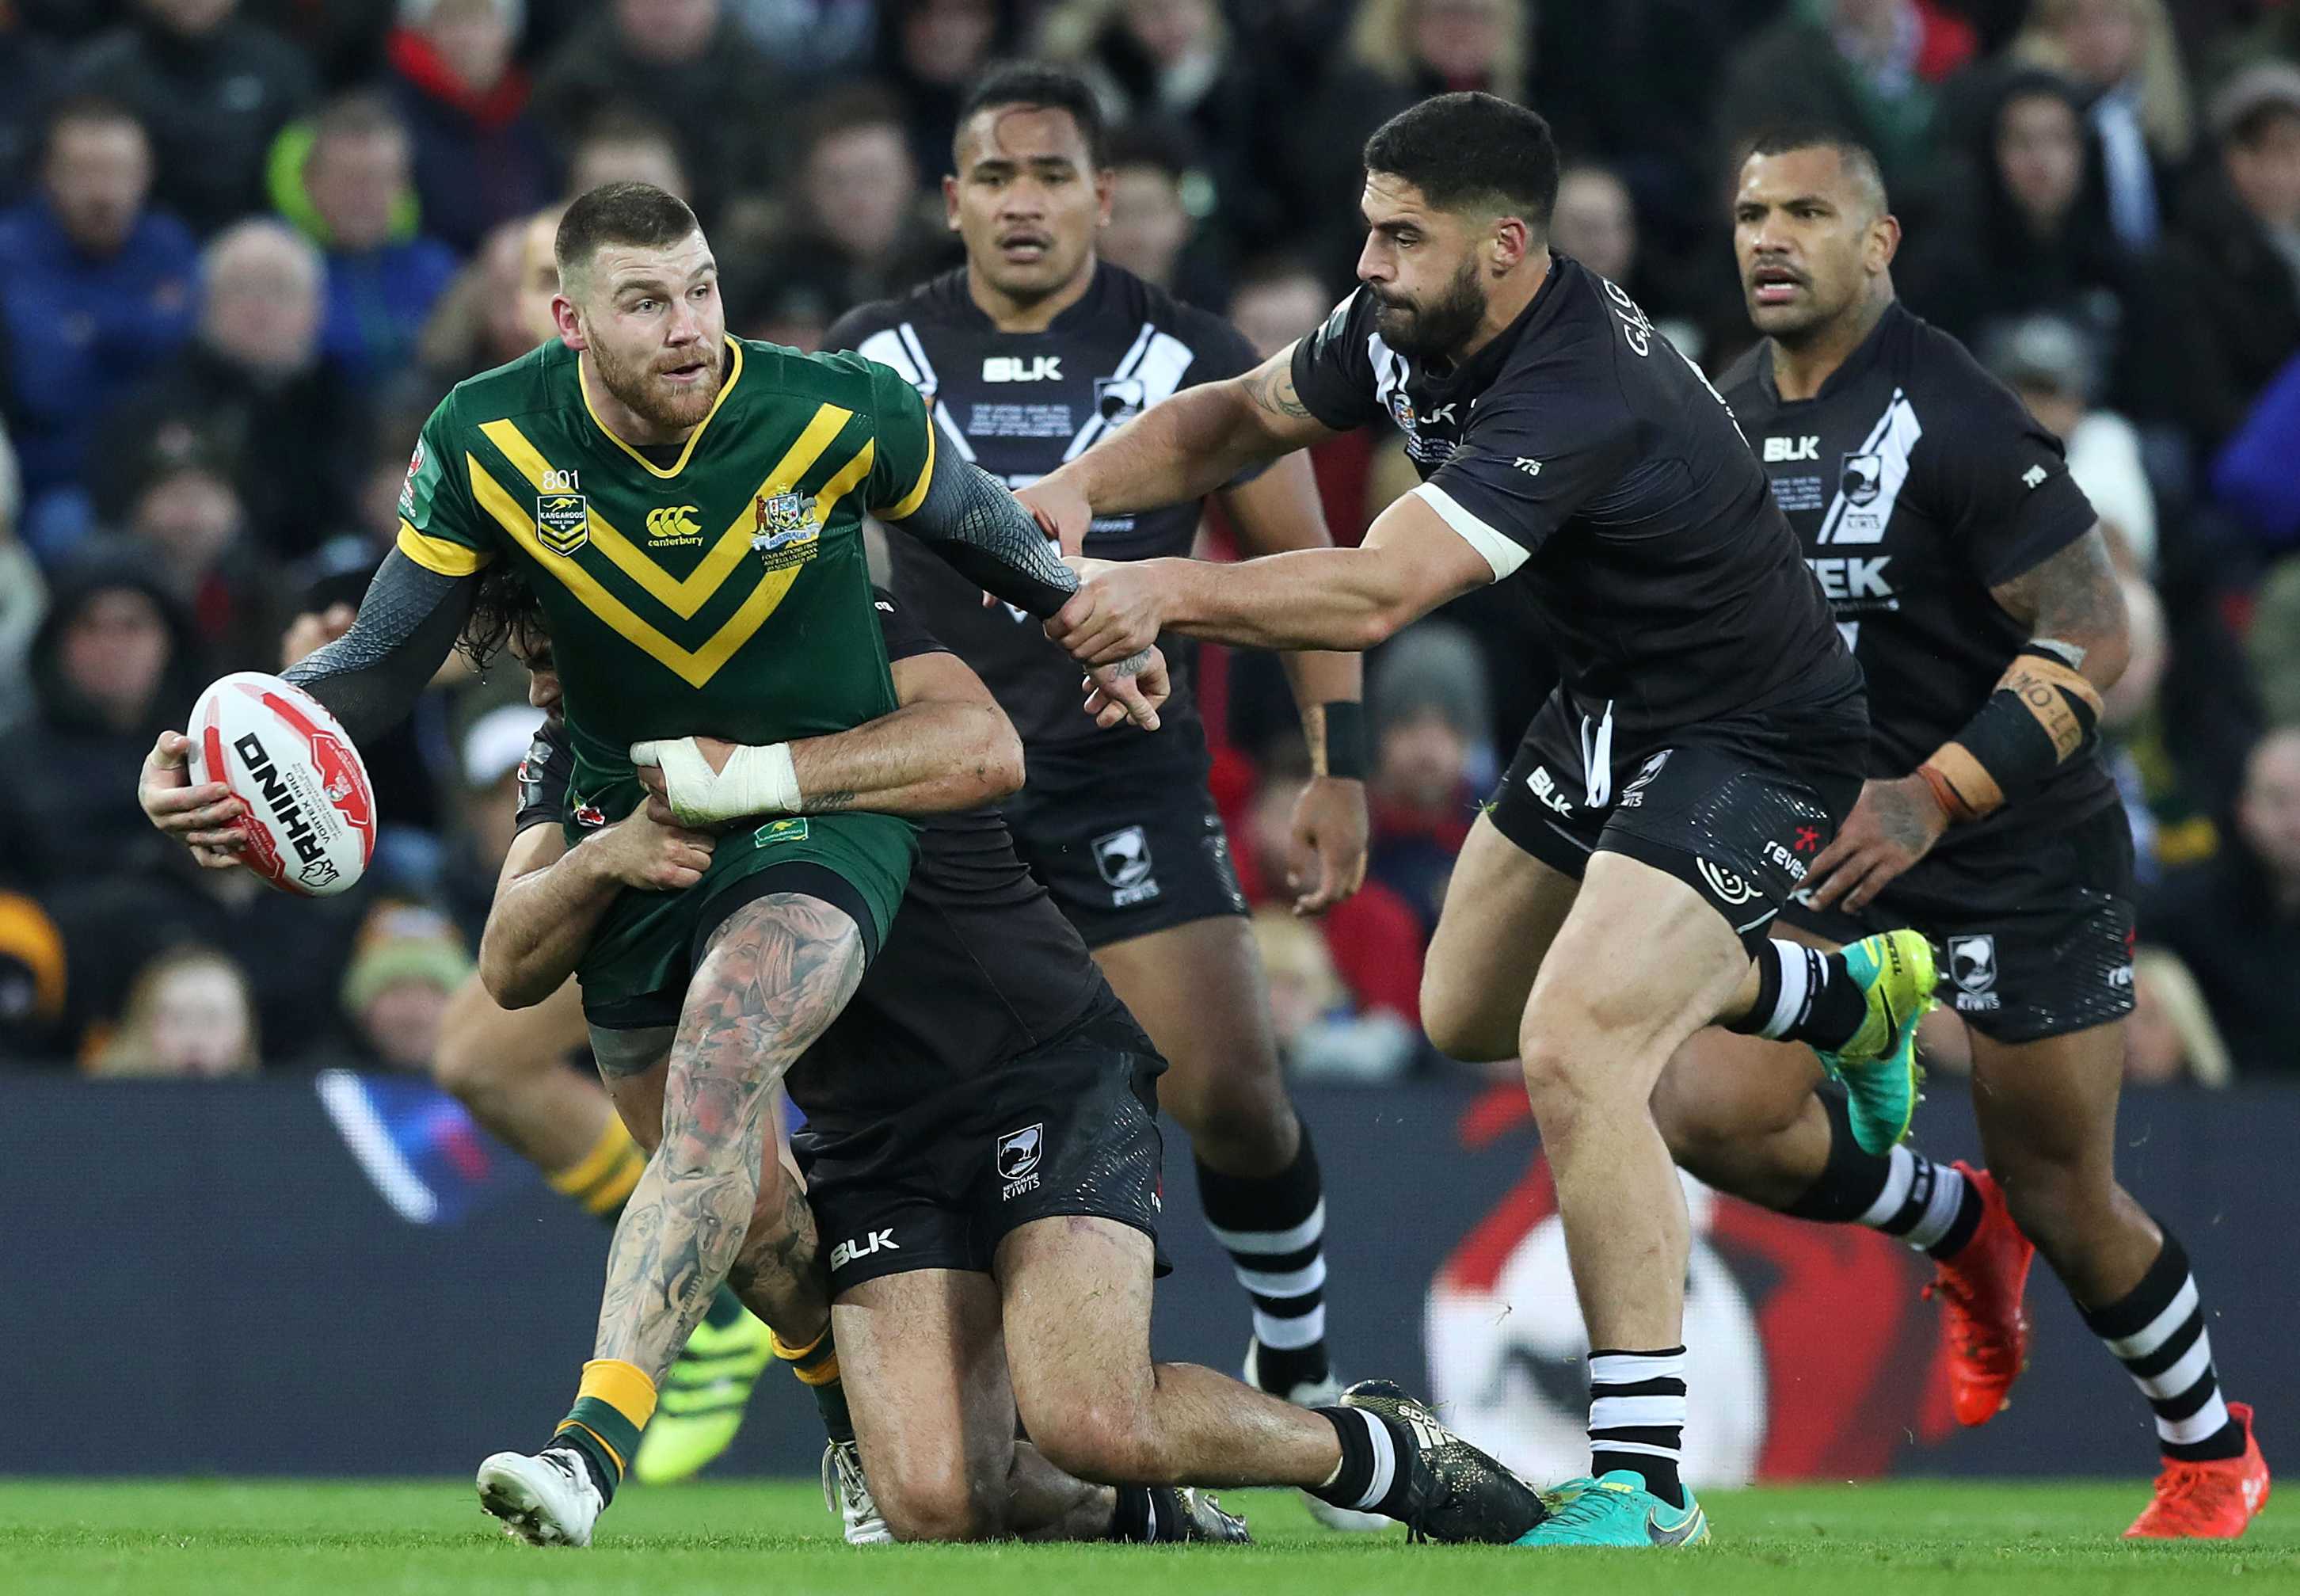 Australia wins Four Nations, beating New Zealand as Kangaroos top rugby league world rankings